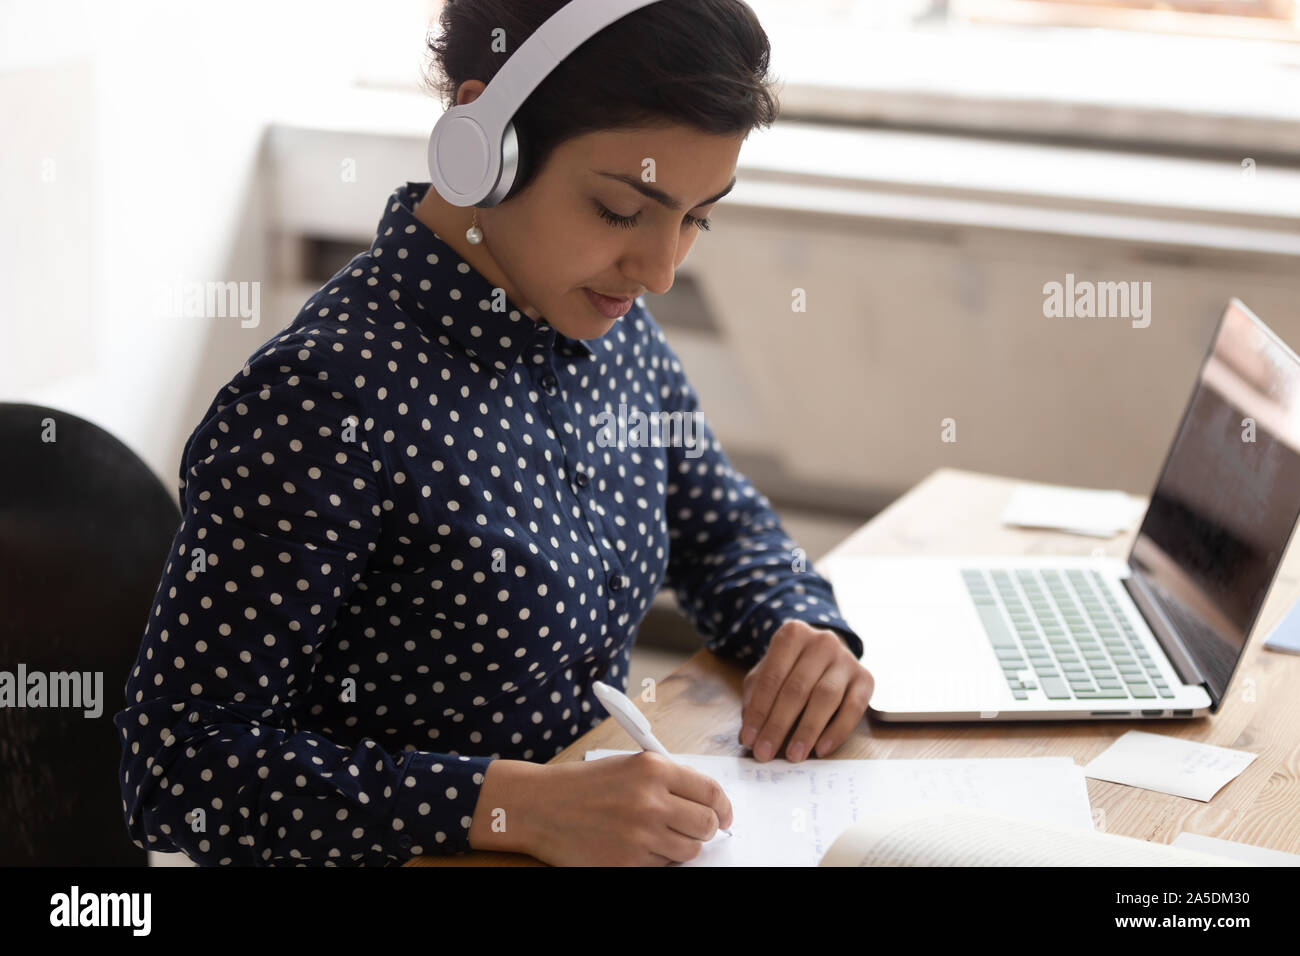 Indian ethnicity woman wearing headphones listens educational course studying online Stock Photo